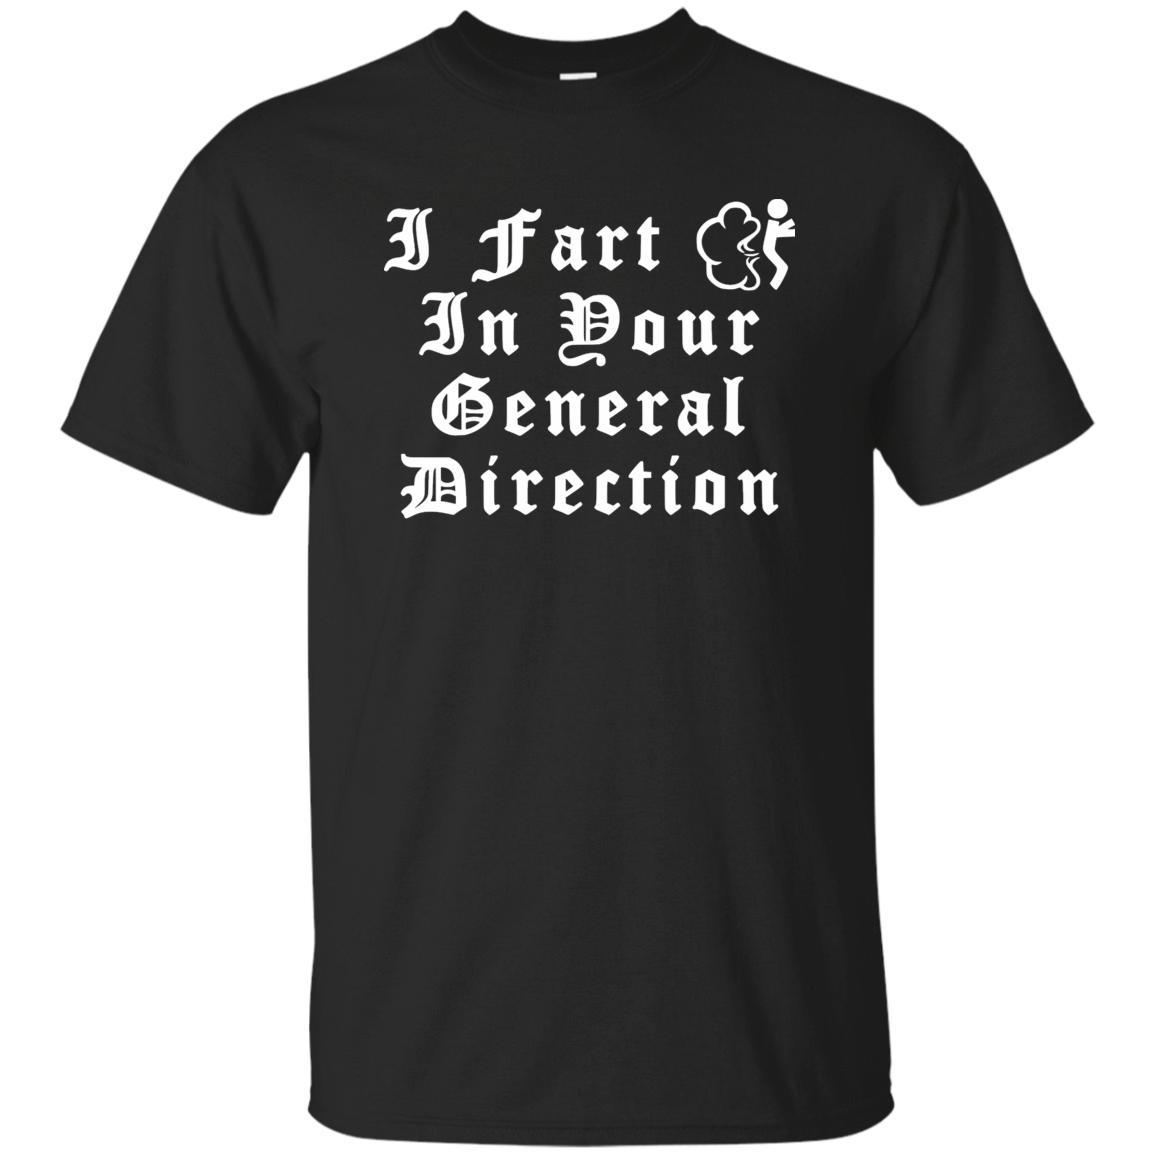 I Fart In Your General Direction Monty Python Shirt